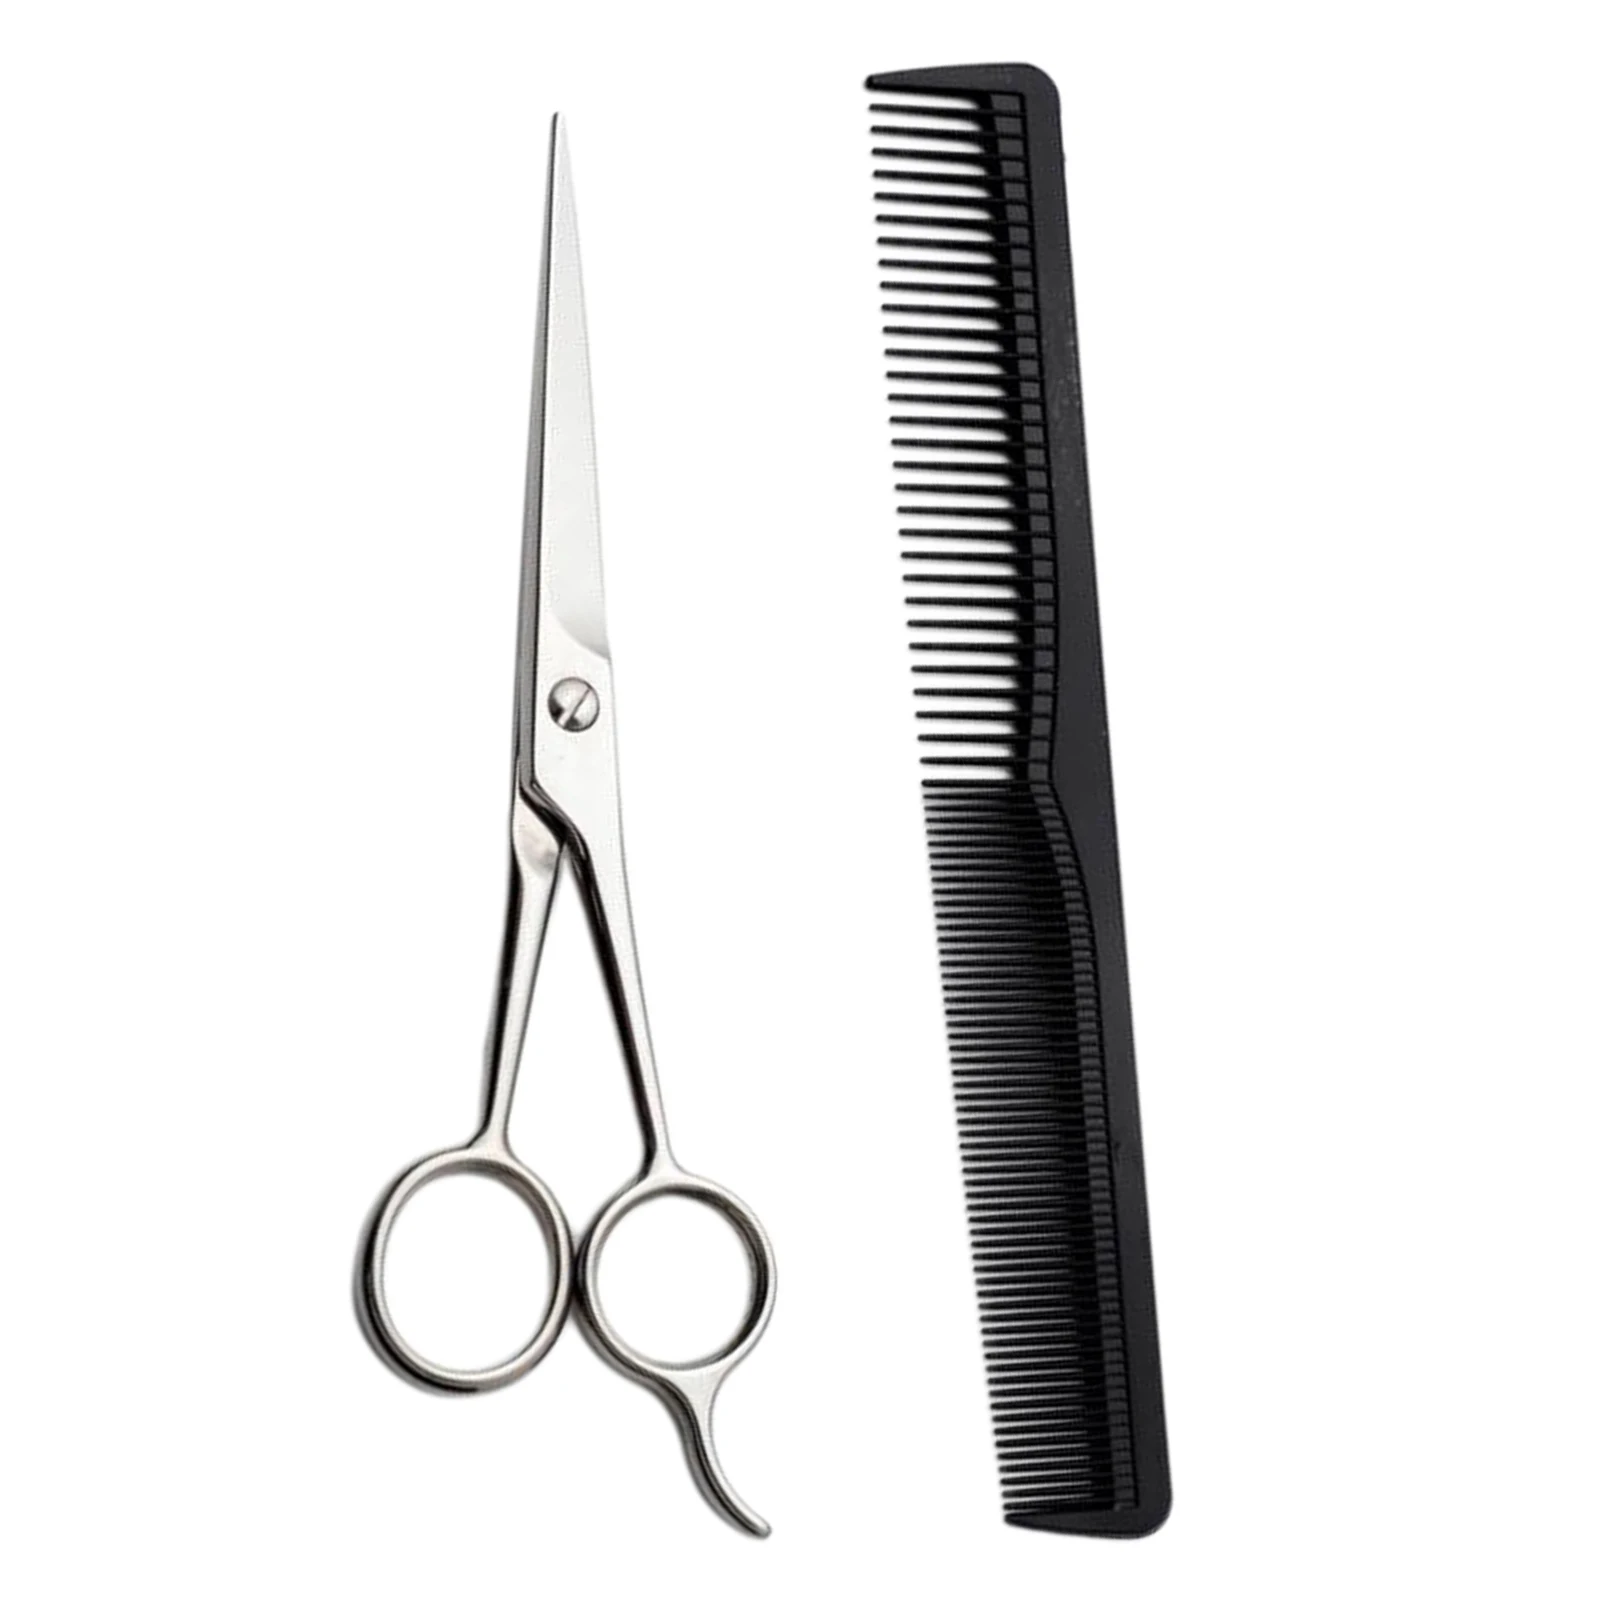 Barber Hair Cutting Scissors Stainless Steel Scissors for Cutting Thinning Hair Comb Barber Accessories 